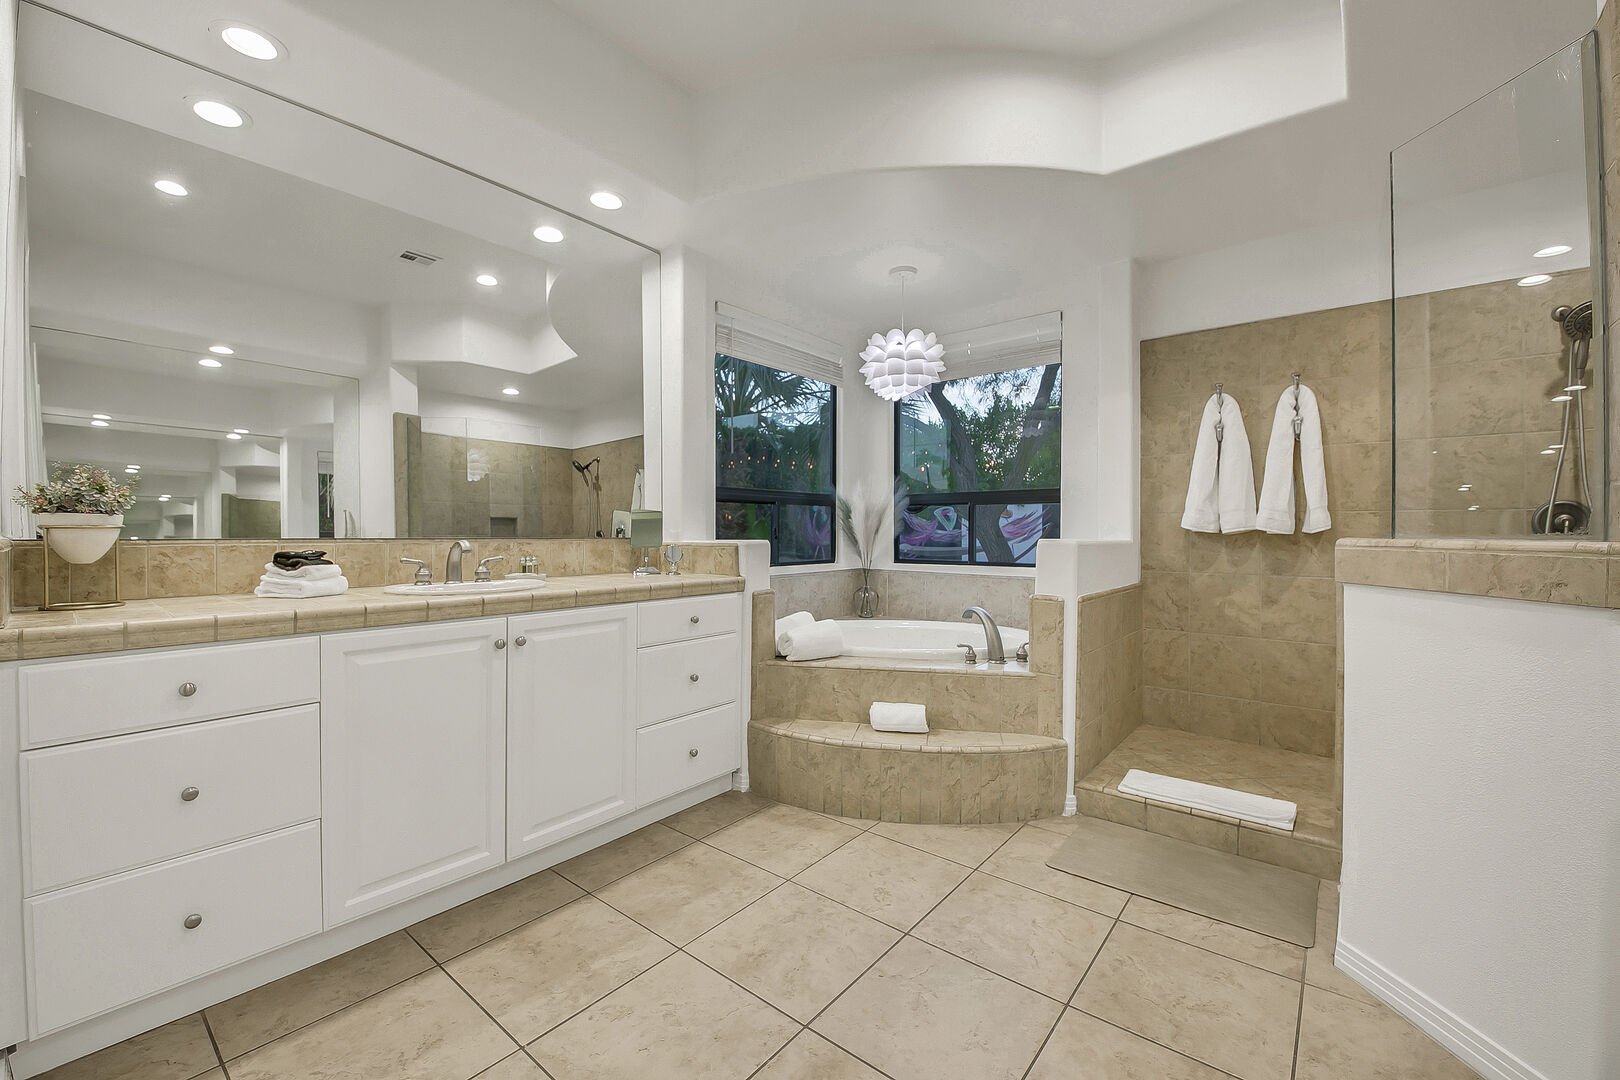 The private en suite master bathroom features a soaking tub, tile shower and his and her vanity sinks.